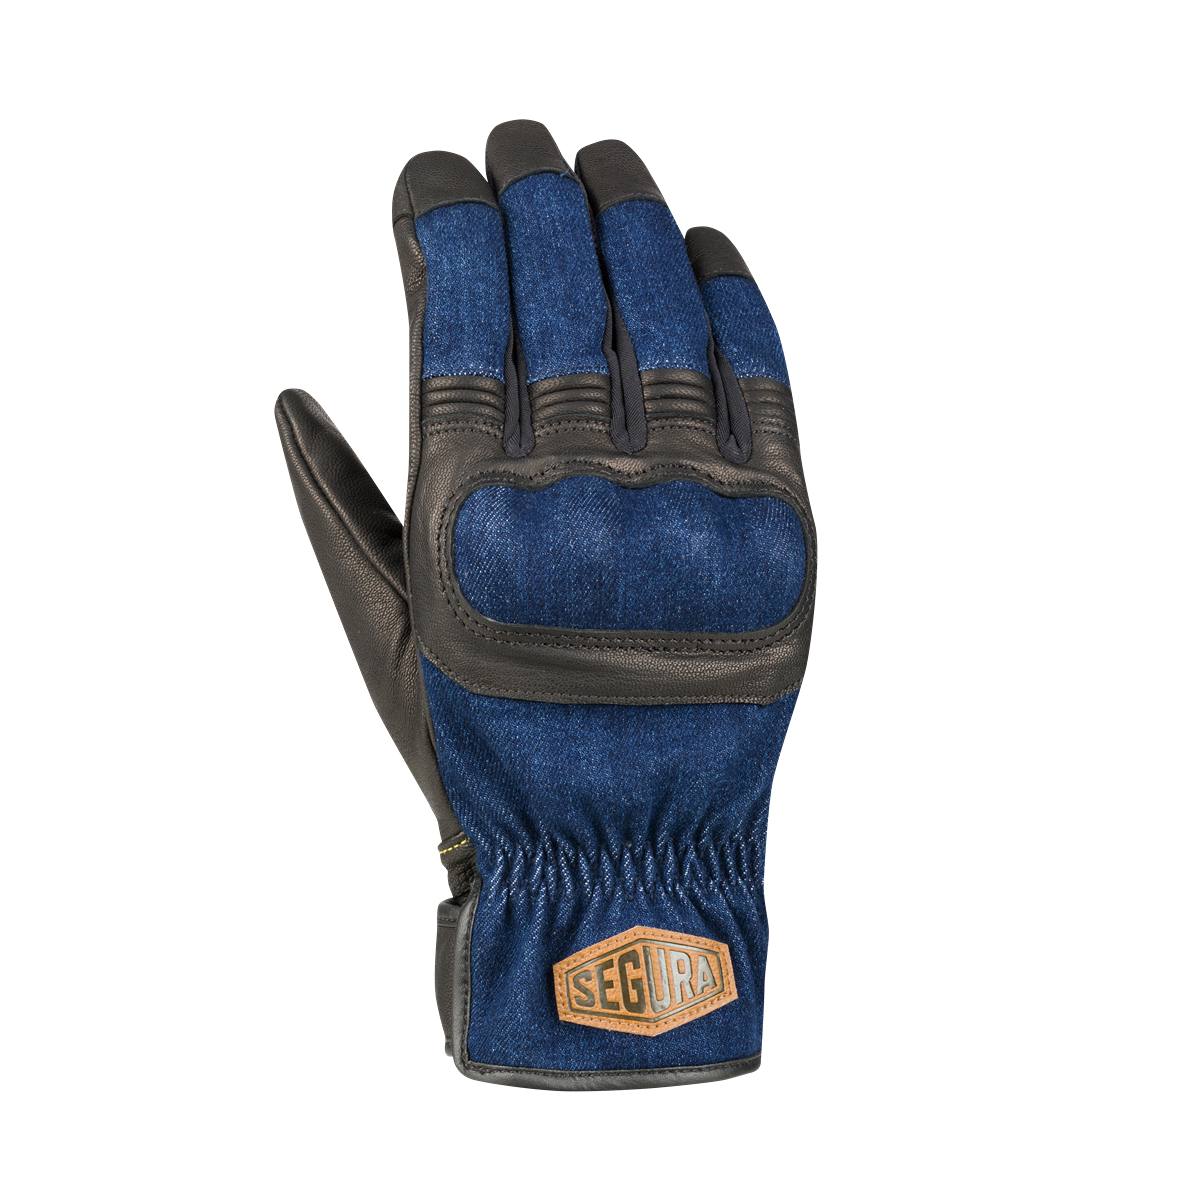 Image of Segura Hunky Gloves Black Blue Taille T12